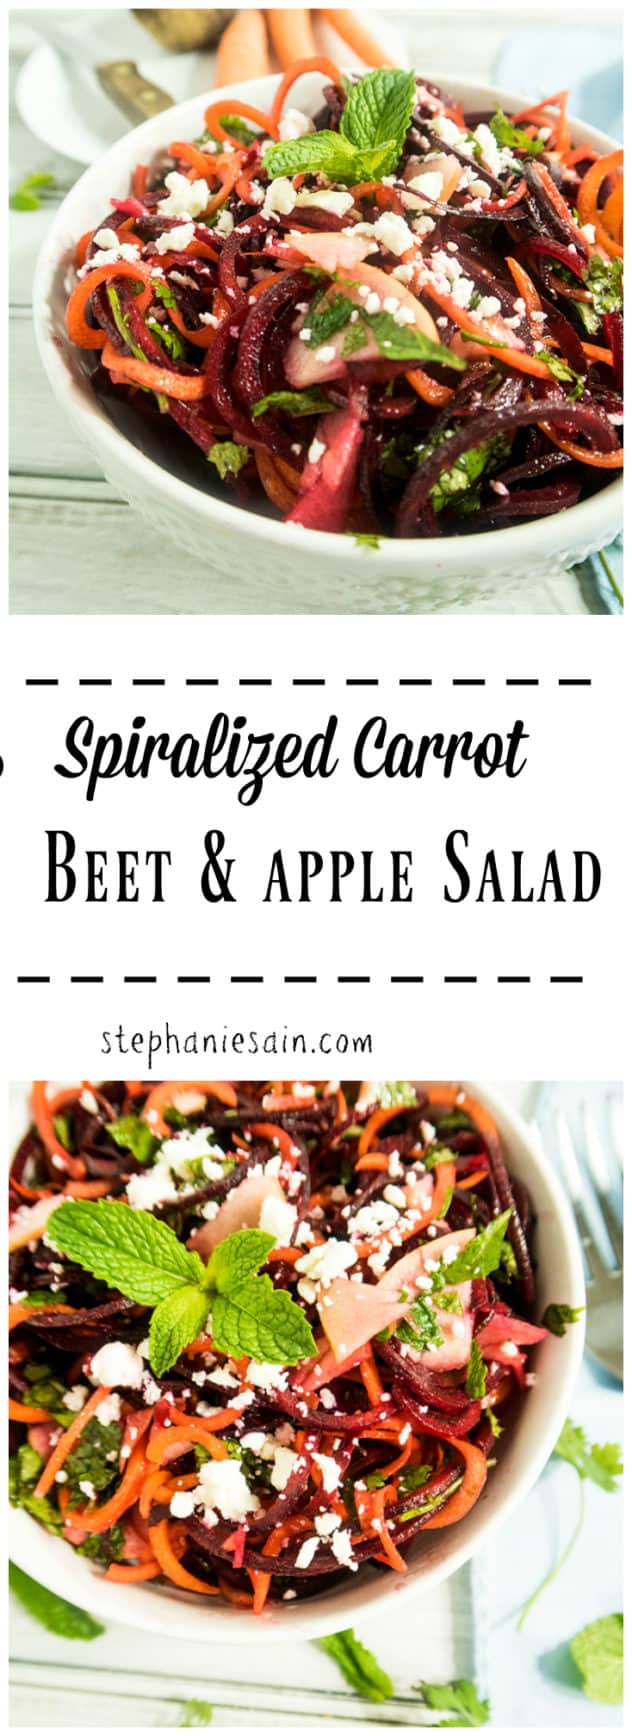 This Spiralized Carrot Beet & Apple Salad is a healthy tasty salad great made ahead and perfect for any occasion. Fun and colorful making it a great addition. Vegetarian, Gluten Free, & Vegan option.